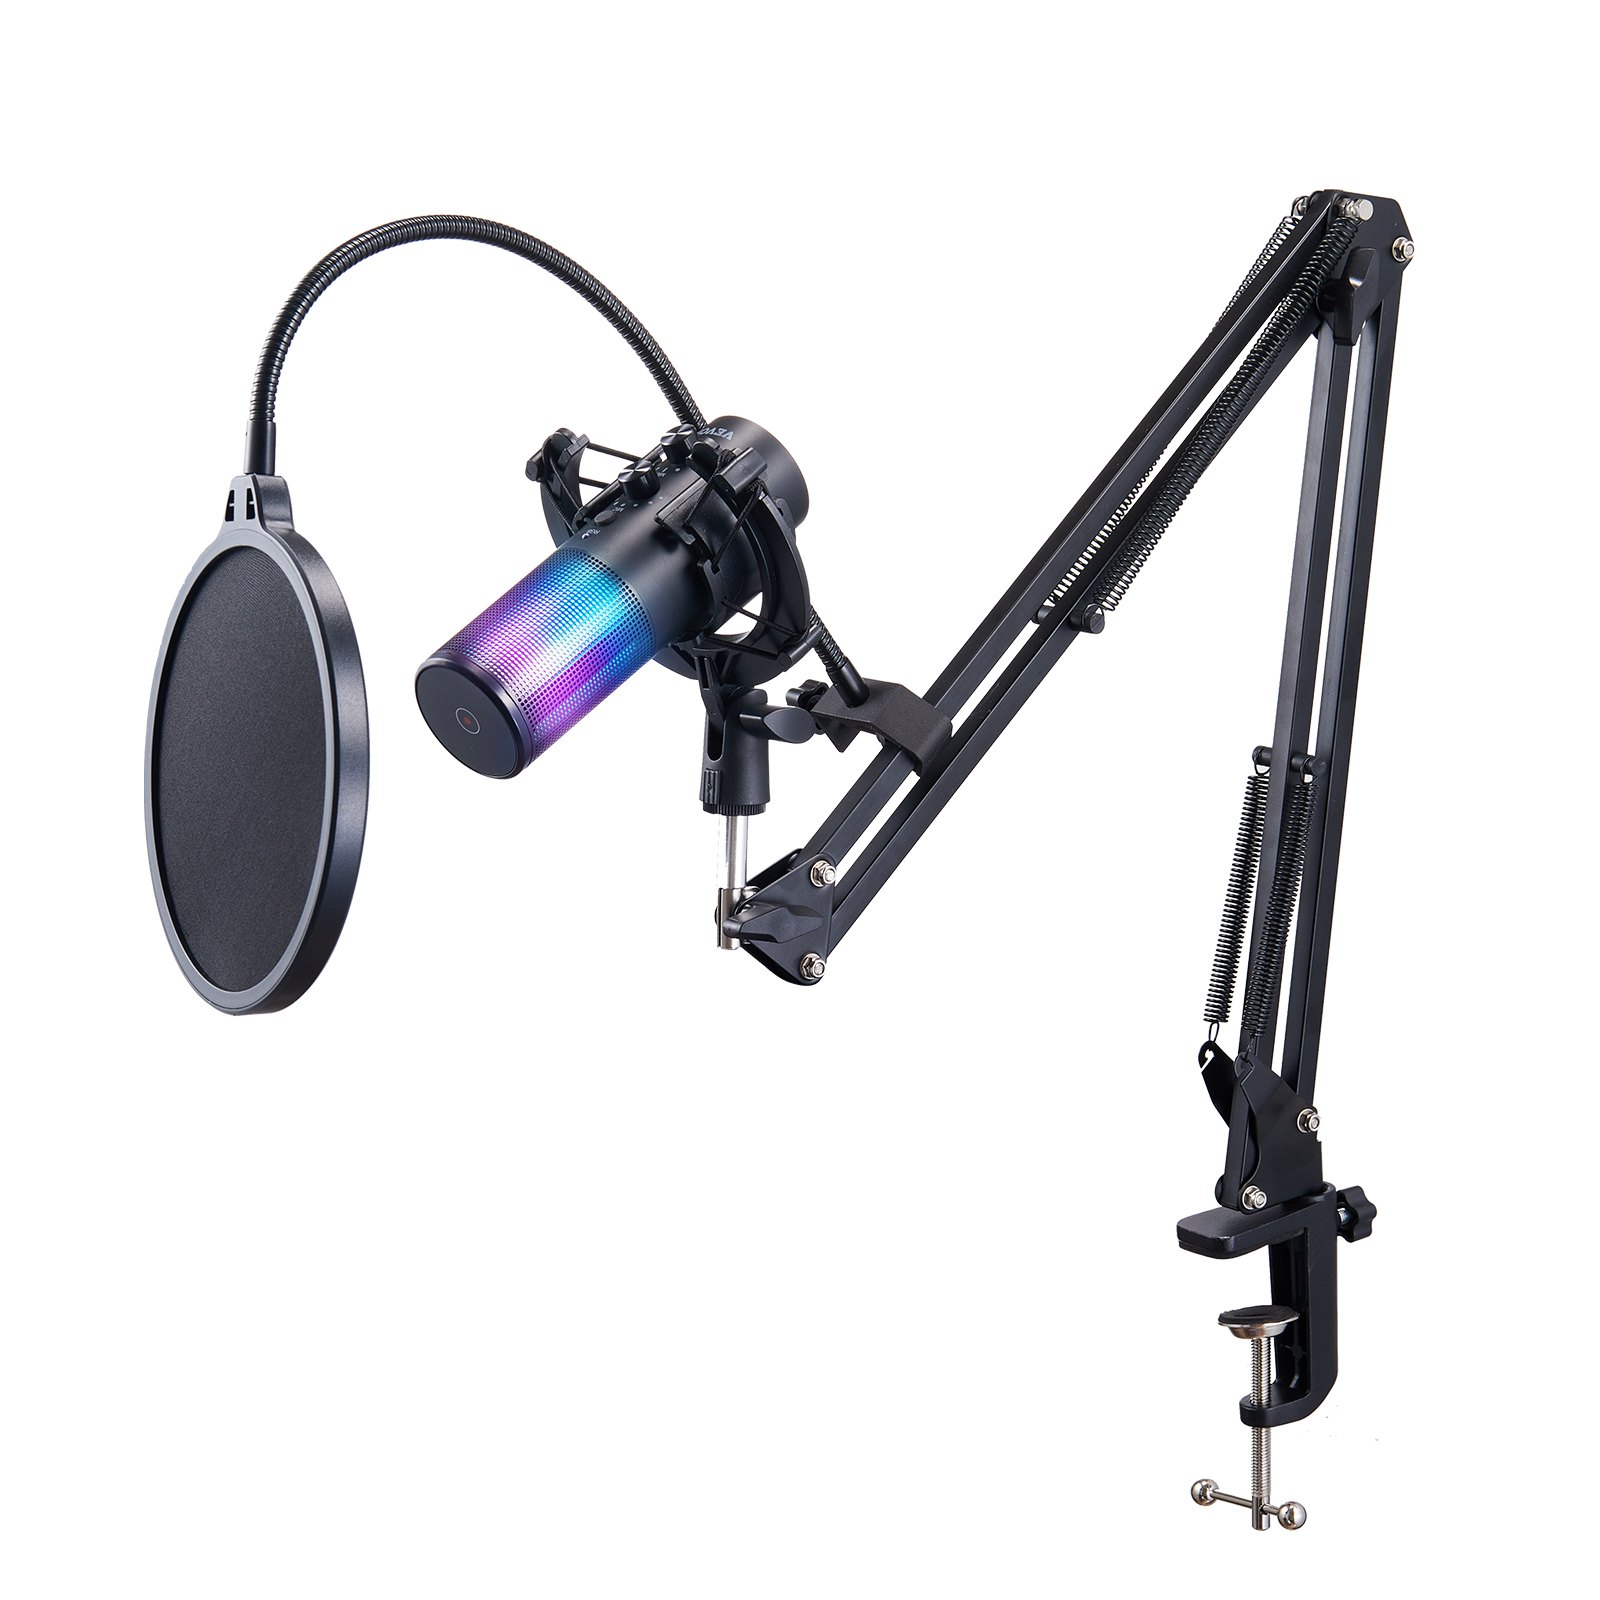 VEVOR USB Microphone, 192 kHz/24-bit, Professional Condenser Microphone Kit with Boom Arm Stand Pop Filter Shock Mount, 11 RGB Lighting Effects Mute Button Headphones Jack for Recording Gaming Singing, Goodies N Stuff